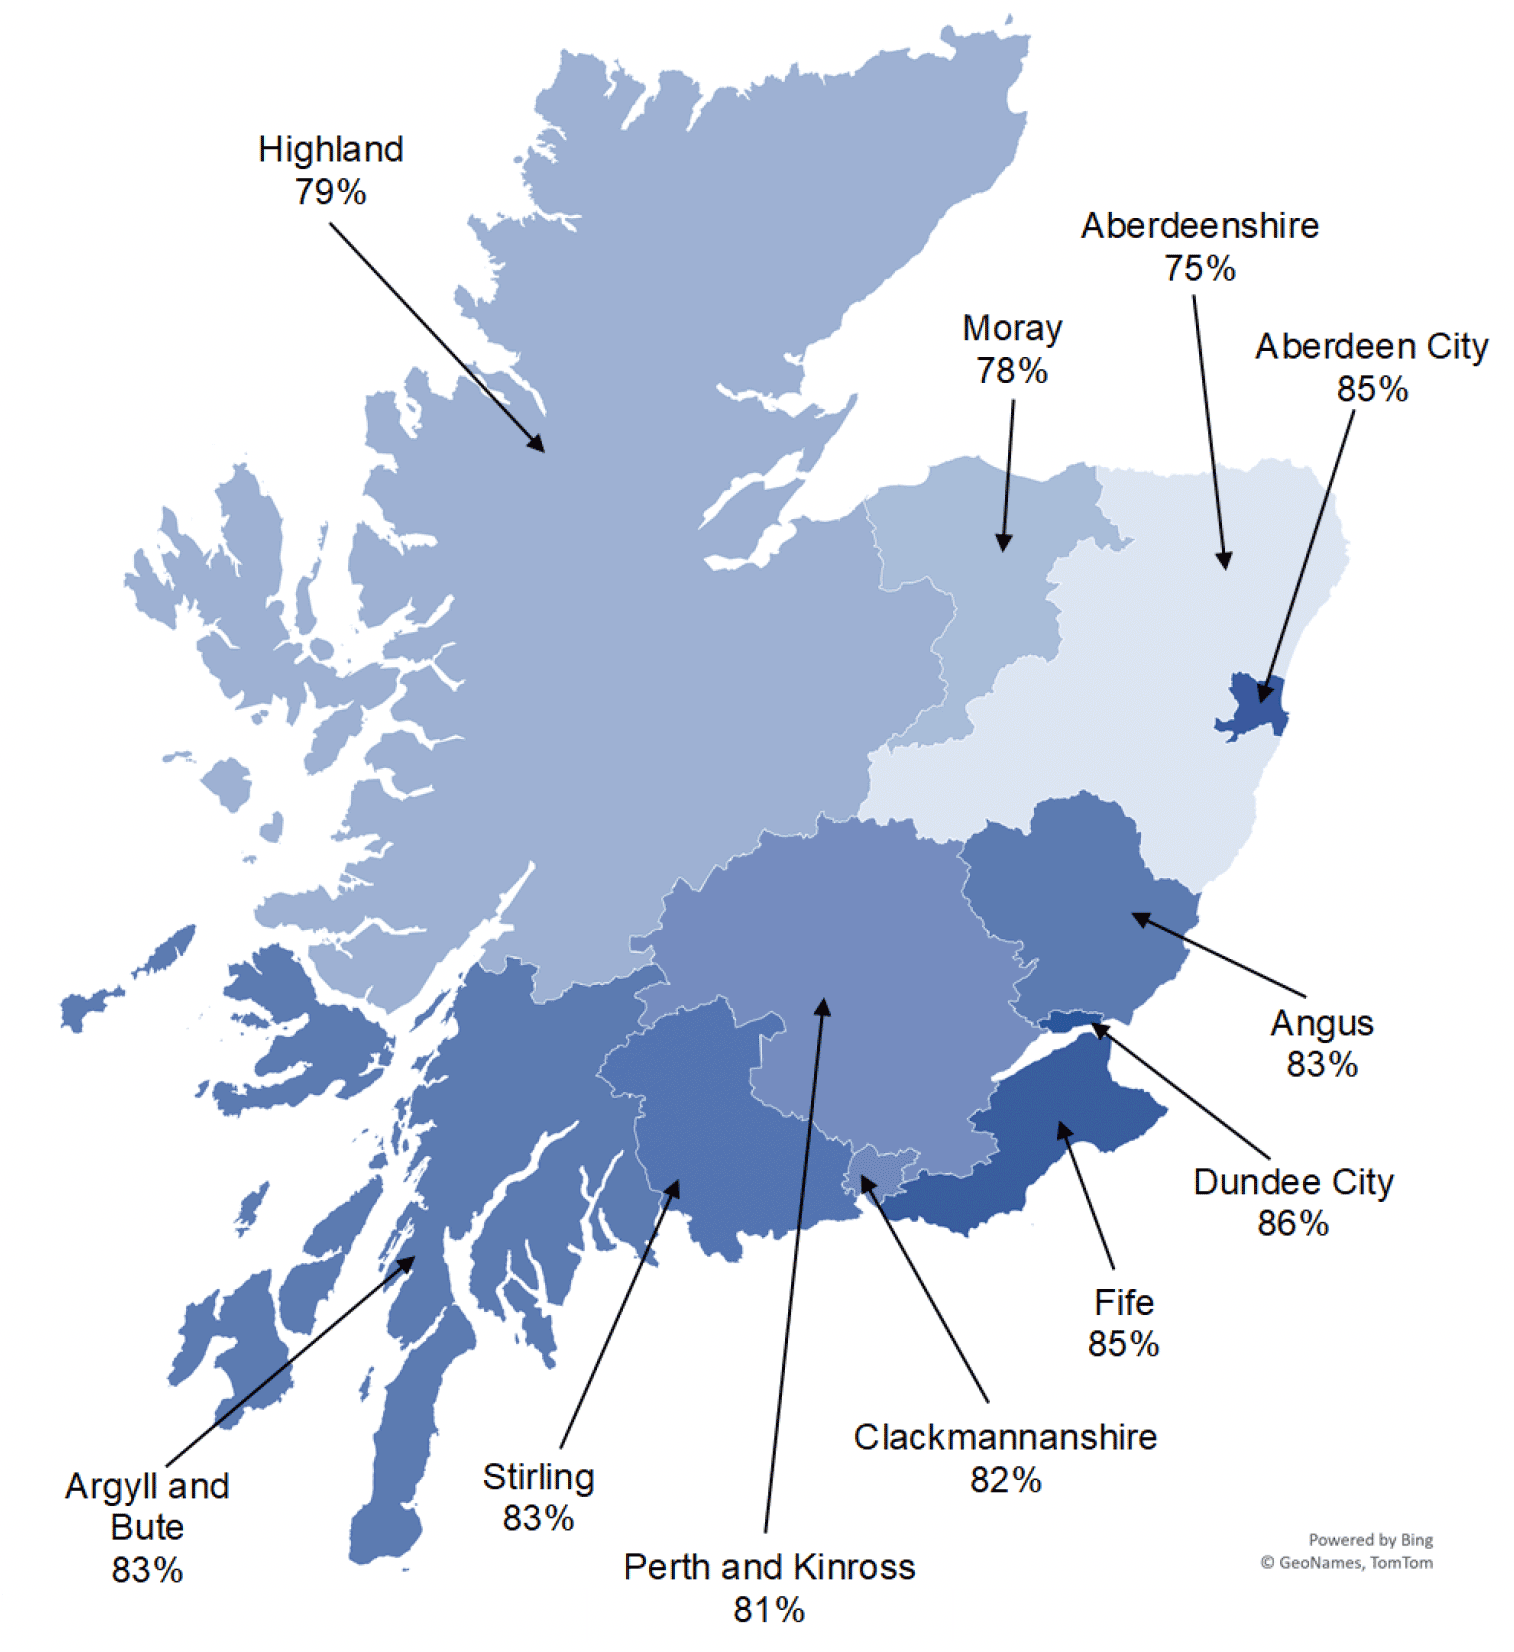 A map showing the take-up rate of Scottish Child Payment by local authority across the North of Scotland, as of March 2023. Argyll and Bute: 83%, Highland: 79%, Stirling: 83%, Perth and Kinross: 81%, Clackmannanshire: 82%, Moray: 79%, Angus: 83%, Fife: 85%, Aberdeenshire: 75%, Dundee City: 86%, Aberdeen City: 85%